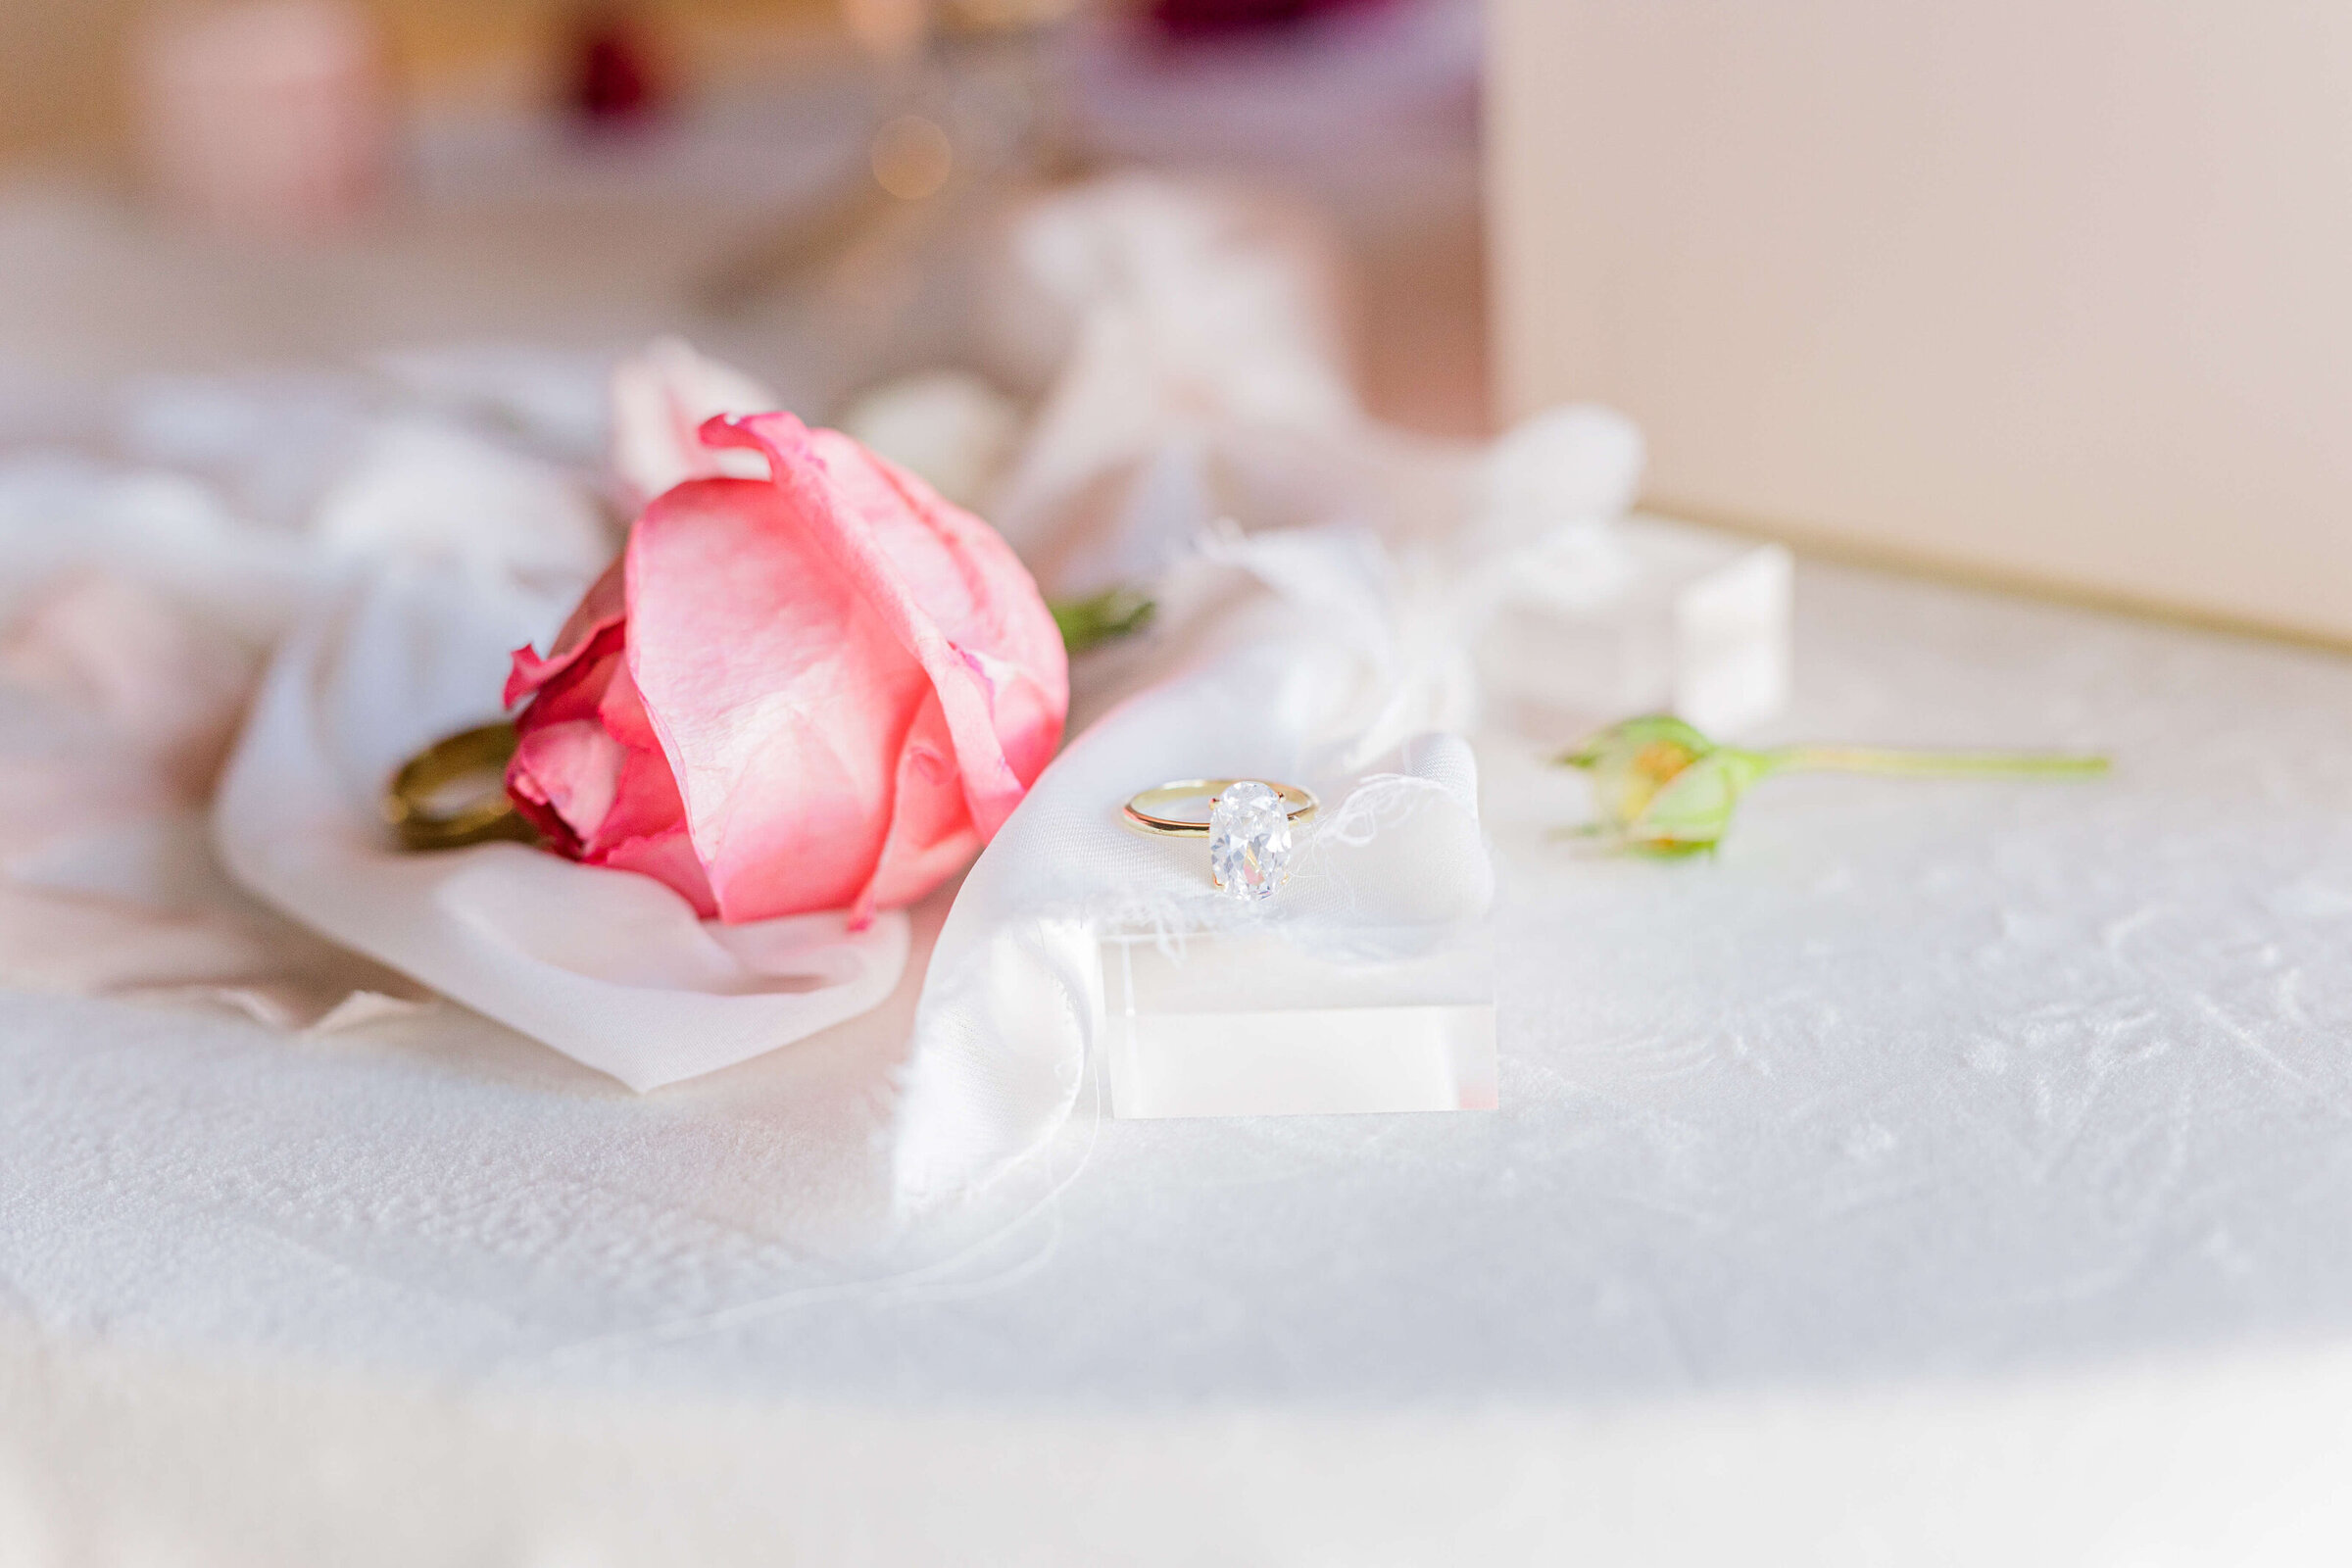 A pink flower sits on a table with a white tablecloth and a diamond ring